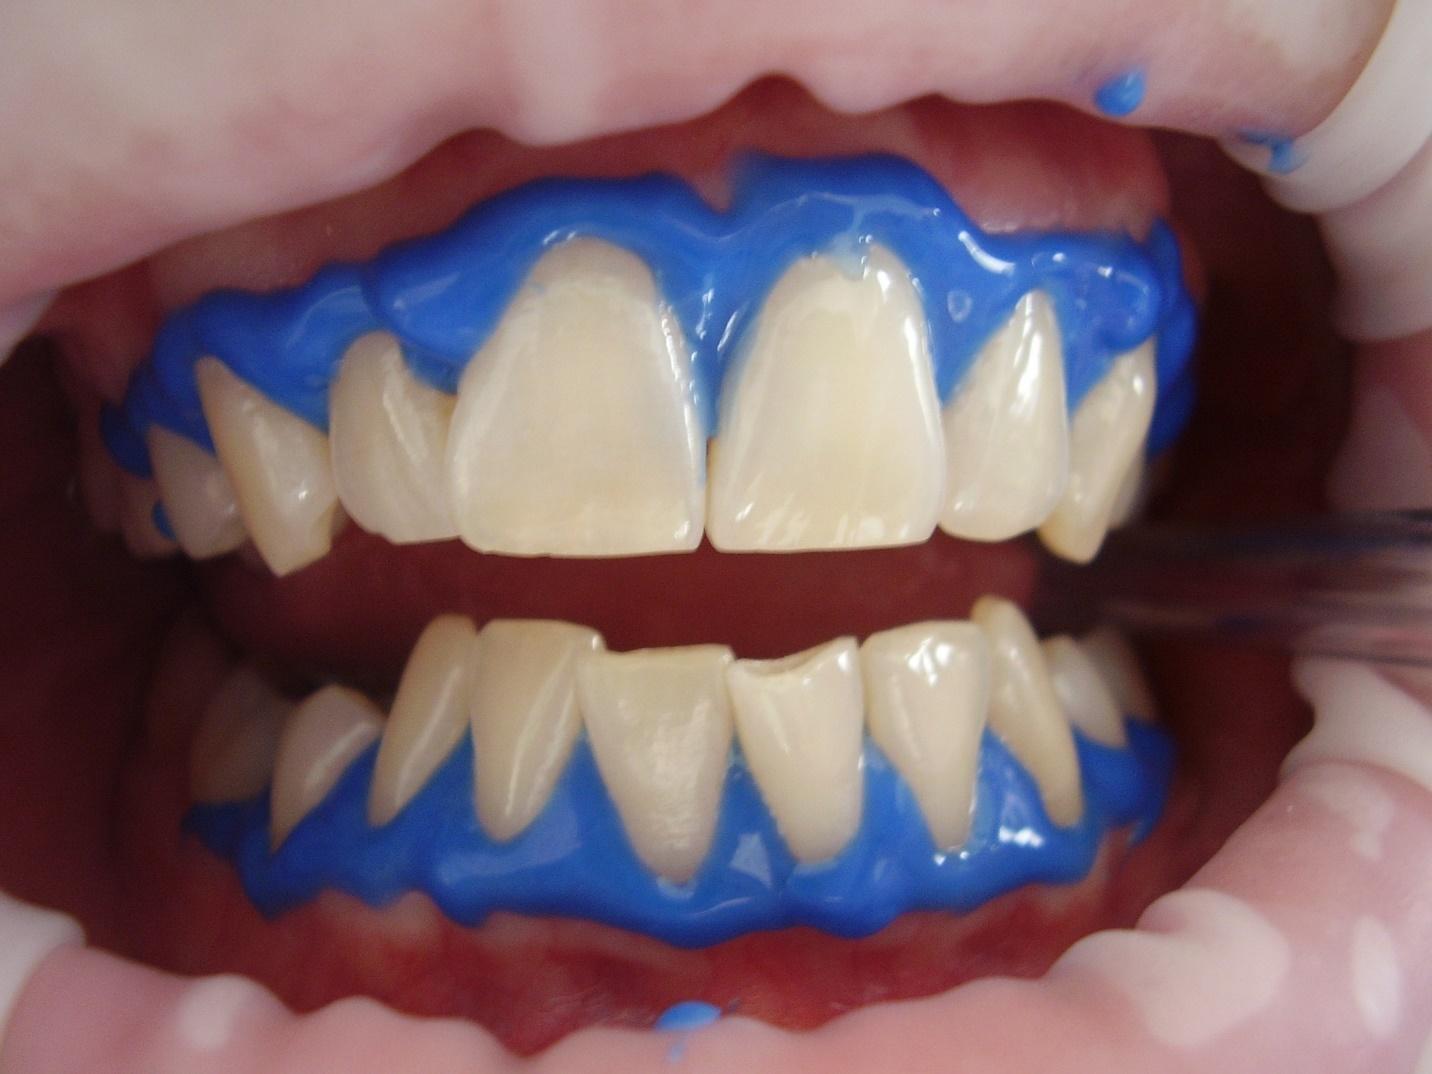 Professional Teeth Whitening Types and Benefits